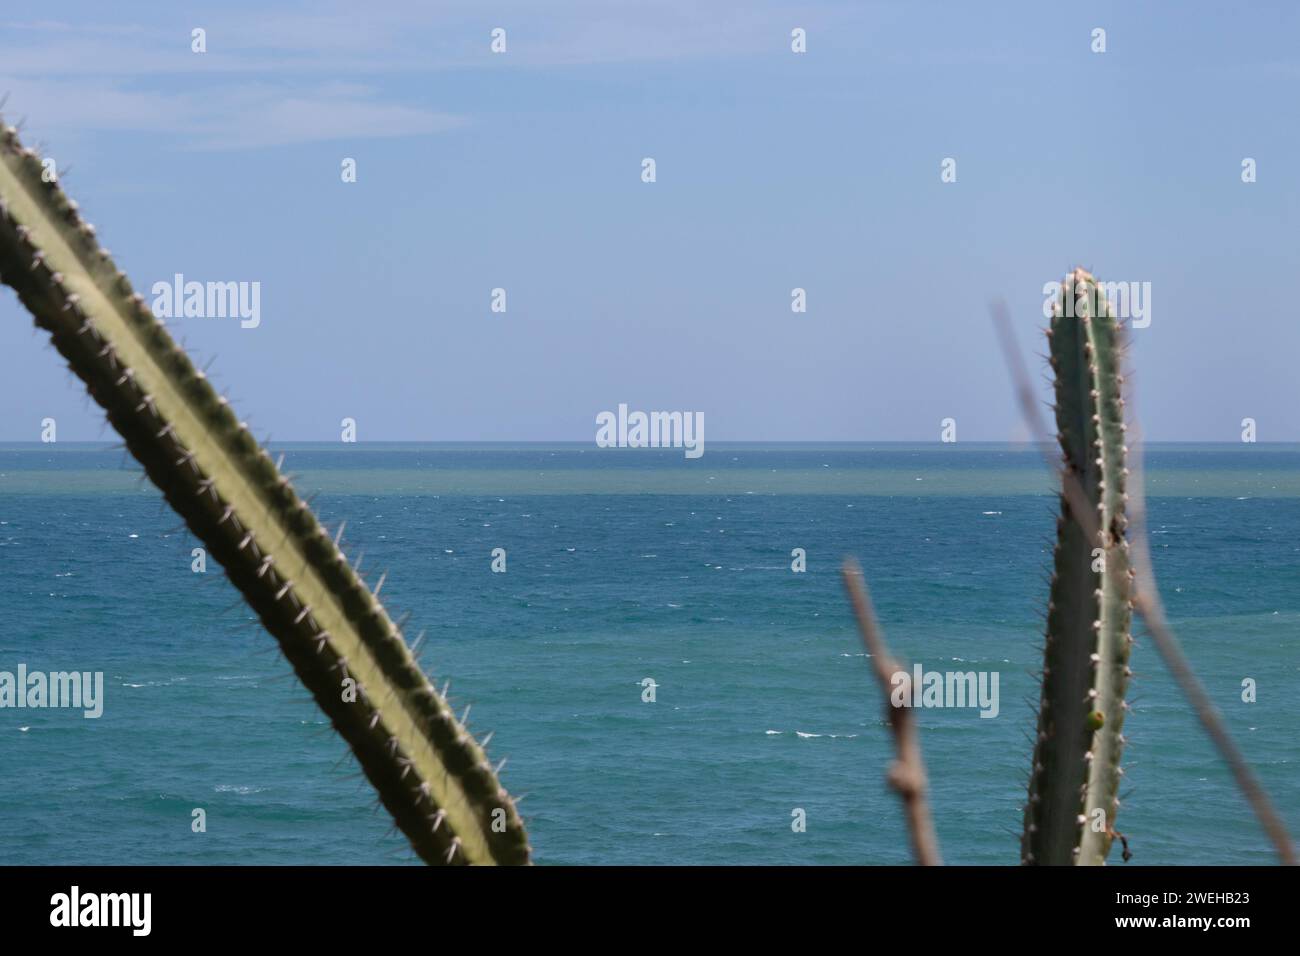 Turquoise caribean sea viewed through wild cactus with blue sky at background Stock Photo